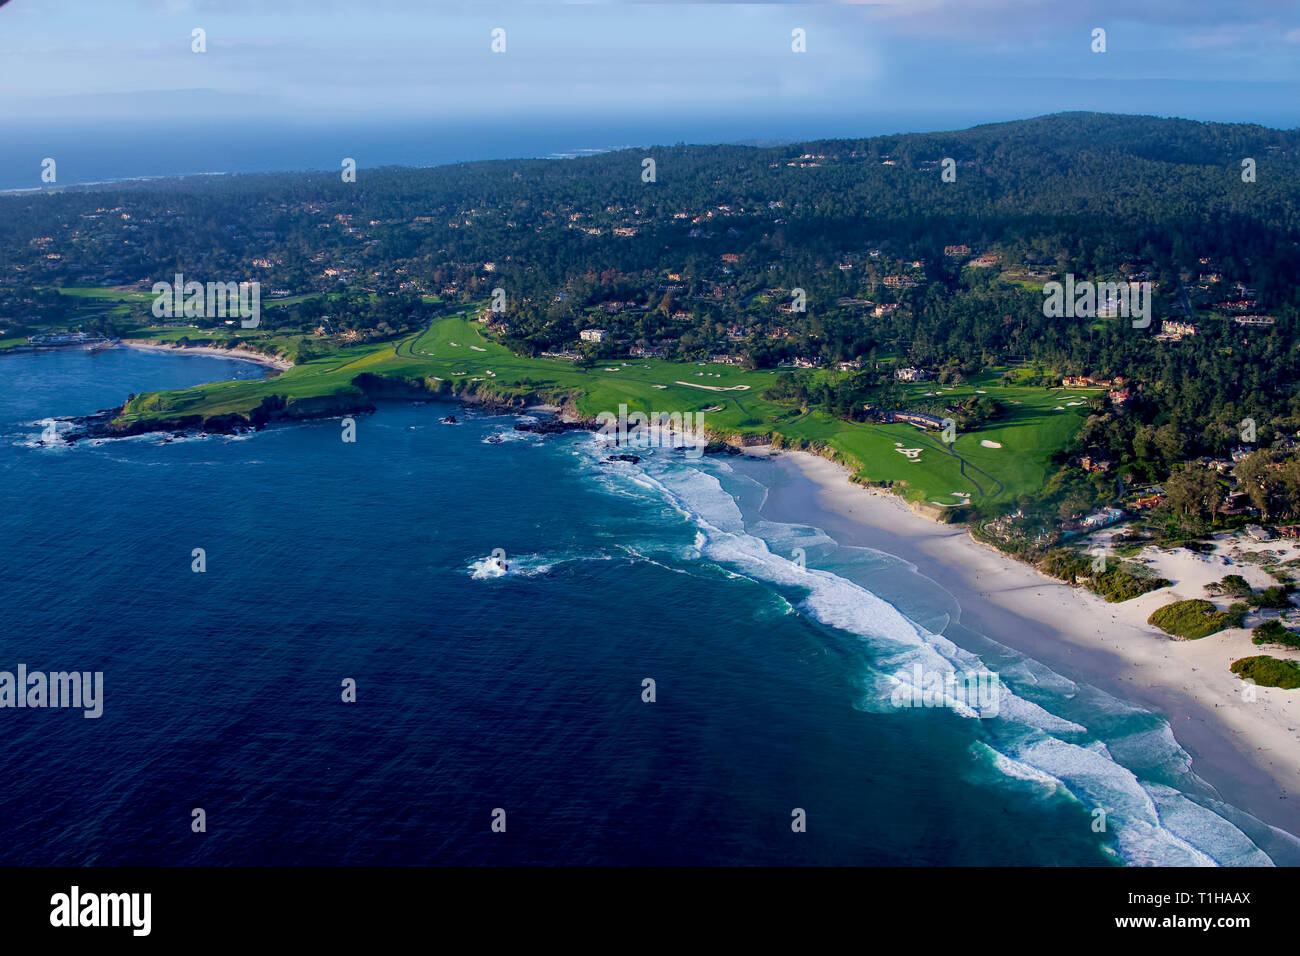 21st March, 2019  Pebble Beach, California, USA Aerial view over the iconic Pebble Beach Golf lLinks - venue for the 2019 US Open golf Championship as Stock Photo